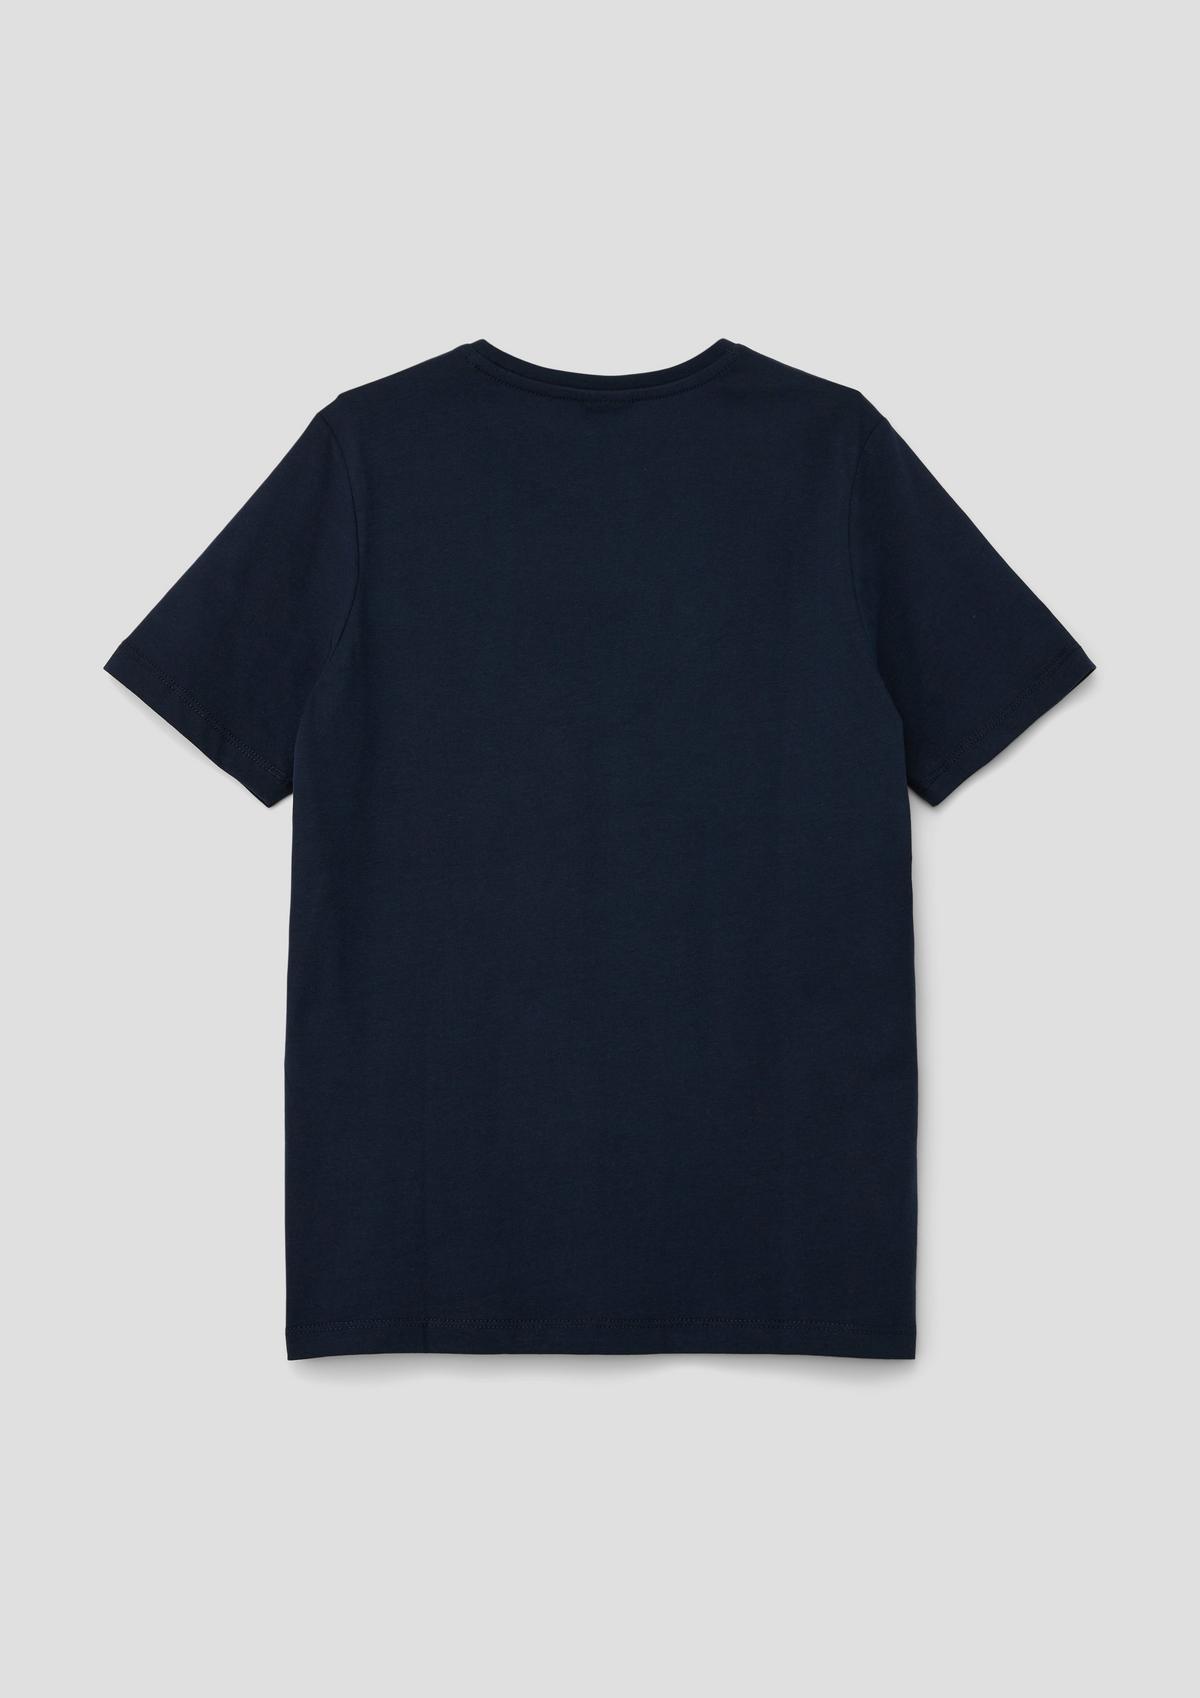 s.Oliver T-shirt made of soft cotton